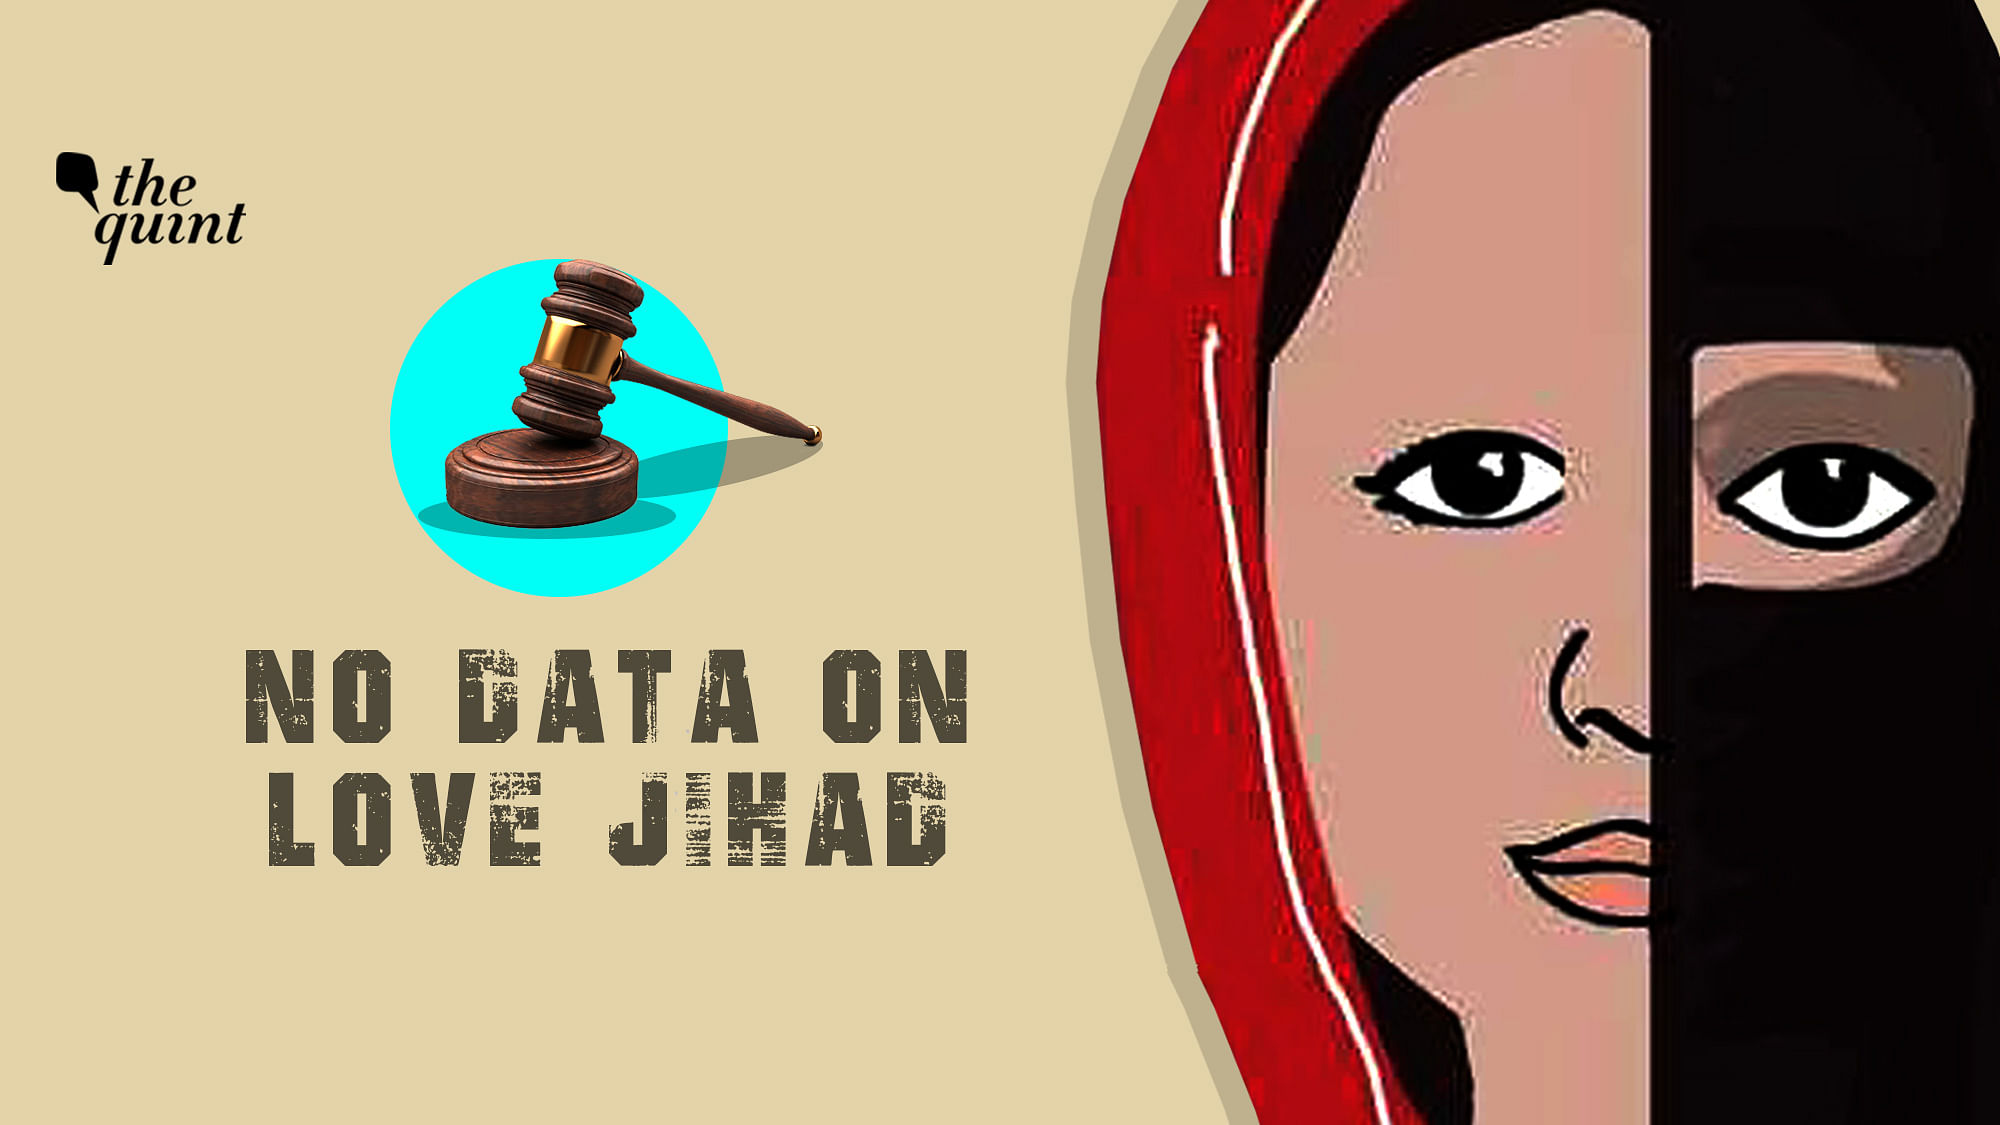 Modi govt, High courts and official investigations have all said they have no data or definition of ‘Love Jihad’.